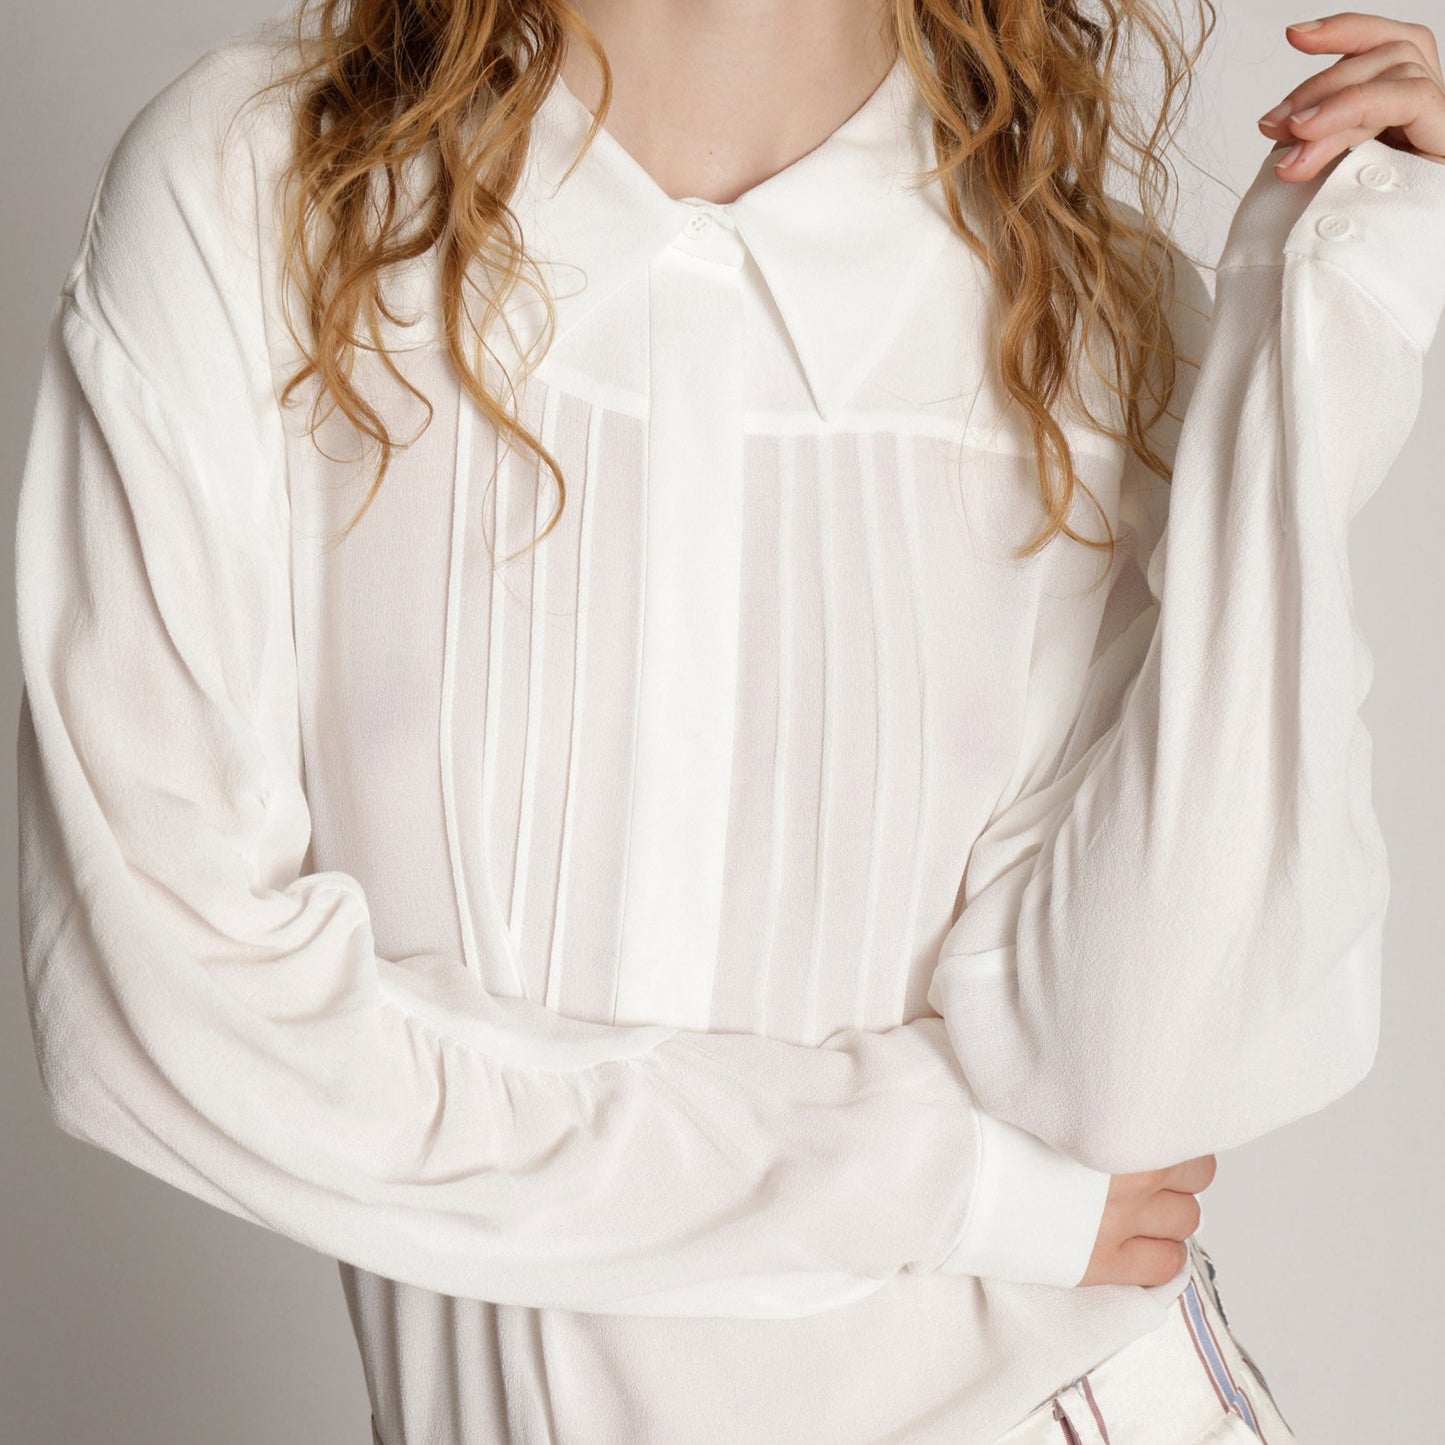 Montenegro Blouse in Ivory